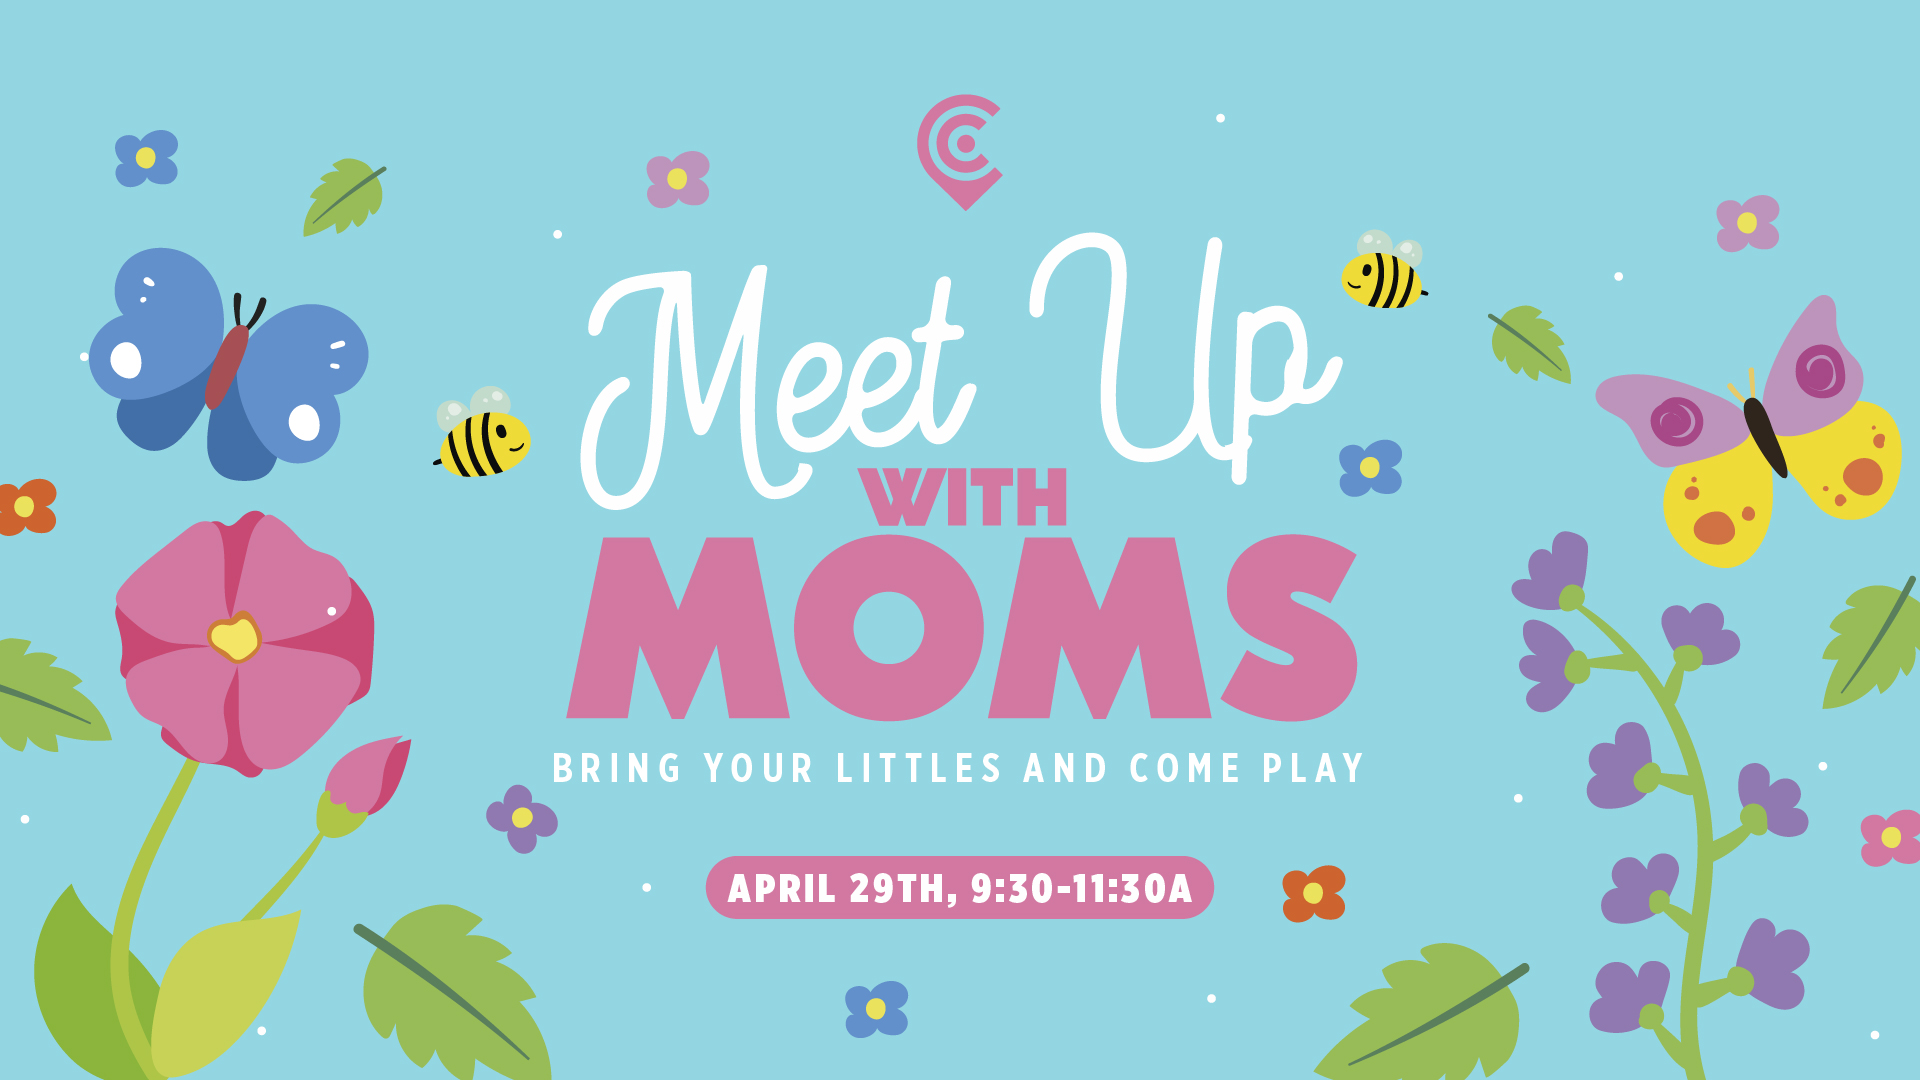 Meet Up with Moms